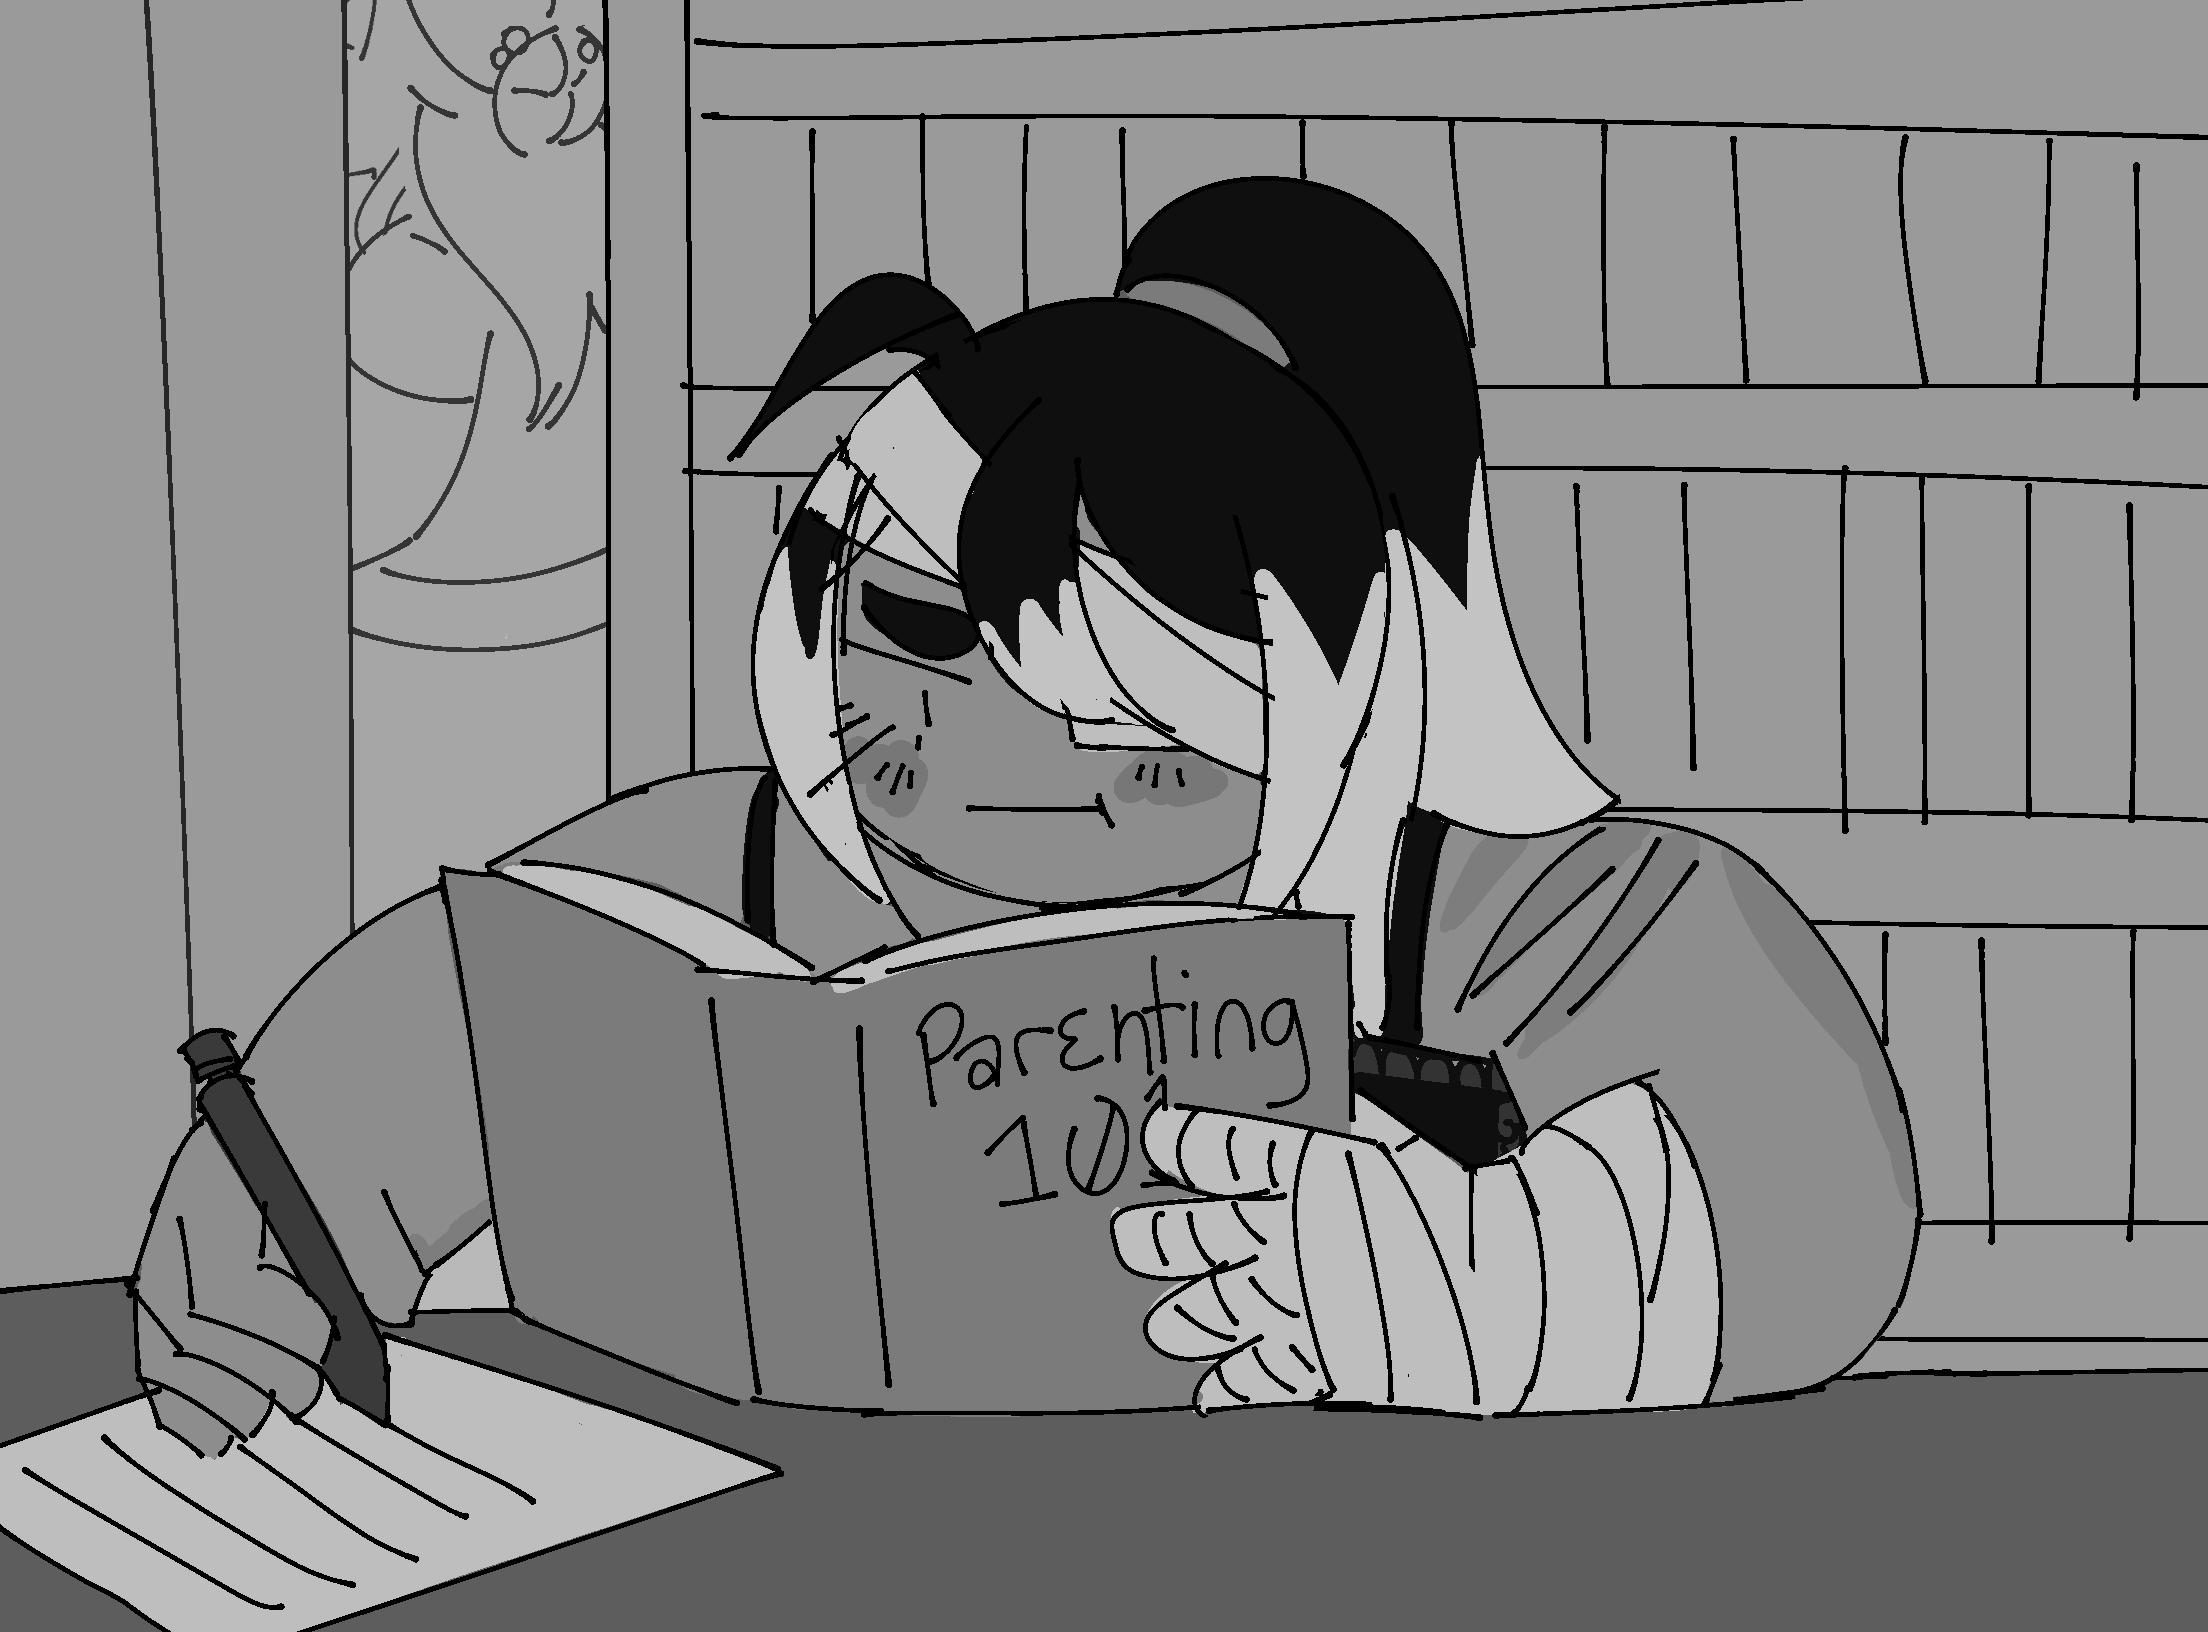 a greyscale sketch of Noire sitting in the Archive, surrounded by bookshelves. He is holding a book with the title 'Parenting 101' and taking notes. in the background, Zelophehad is passing between bookshelves, with his back turned.